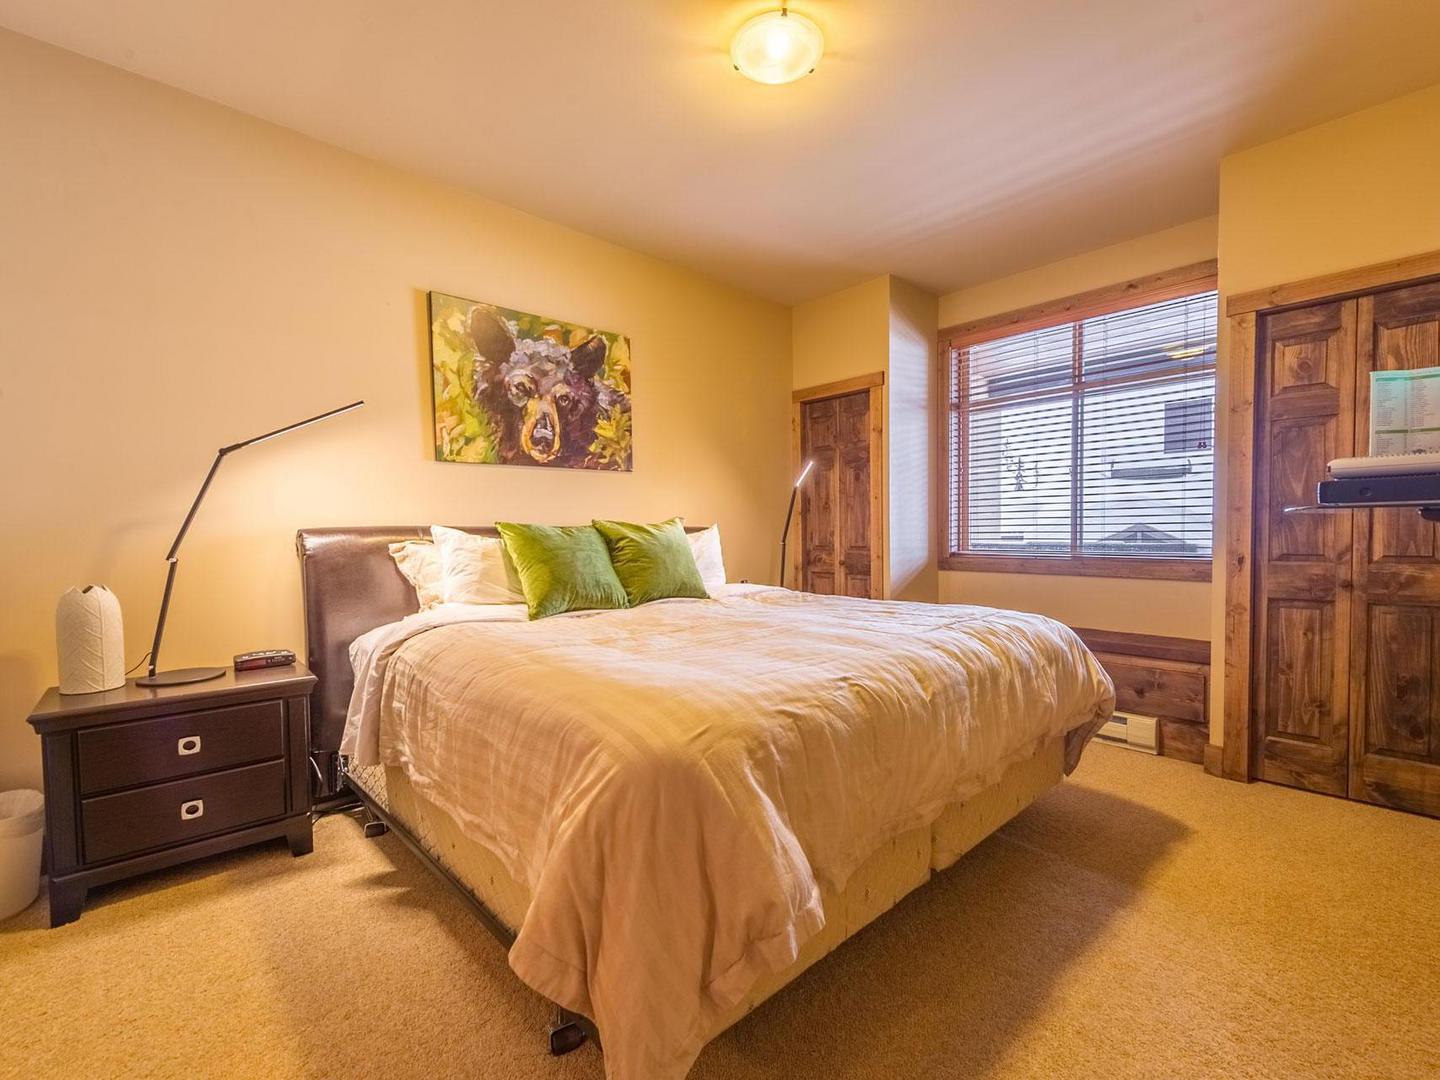 South Point 22 bedroom with a comfortable bed and bright lighting in a luxury vacation rental managed by Luxury Mountain Vacation Rentals at Big White Ski Resort.